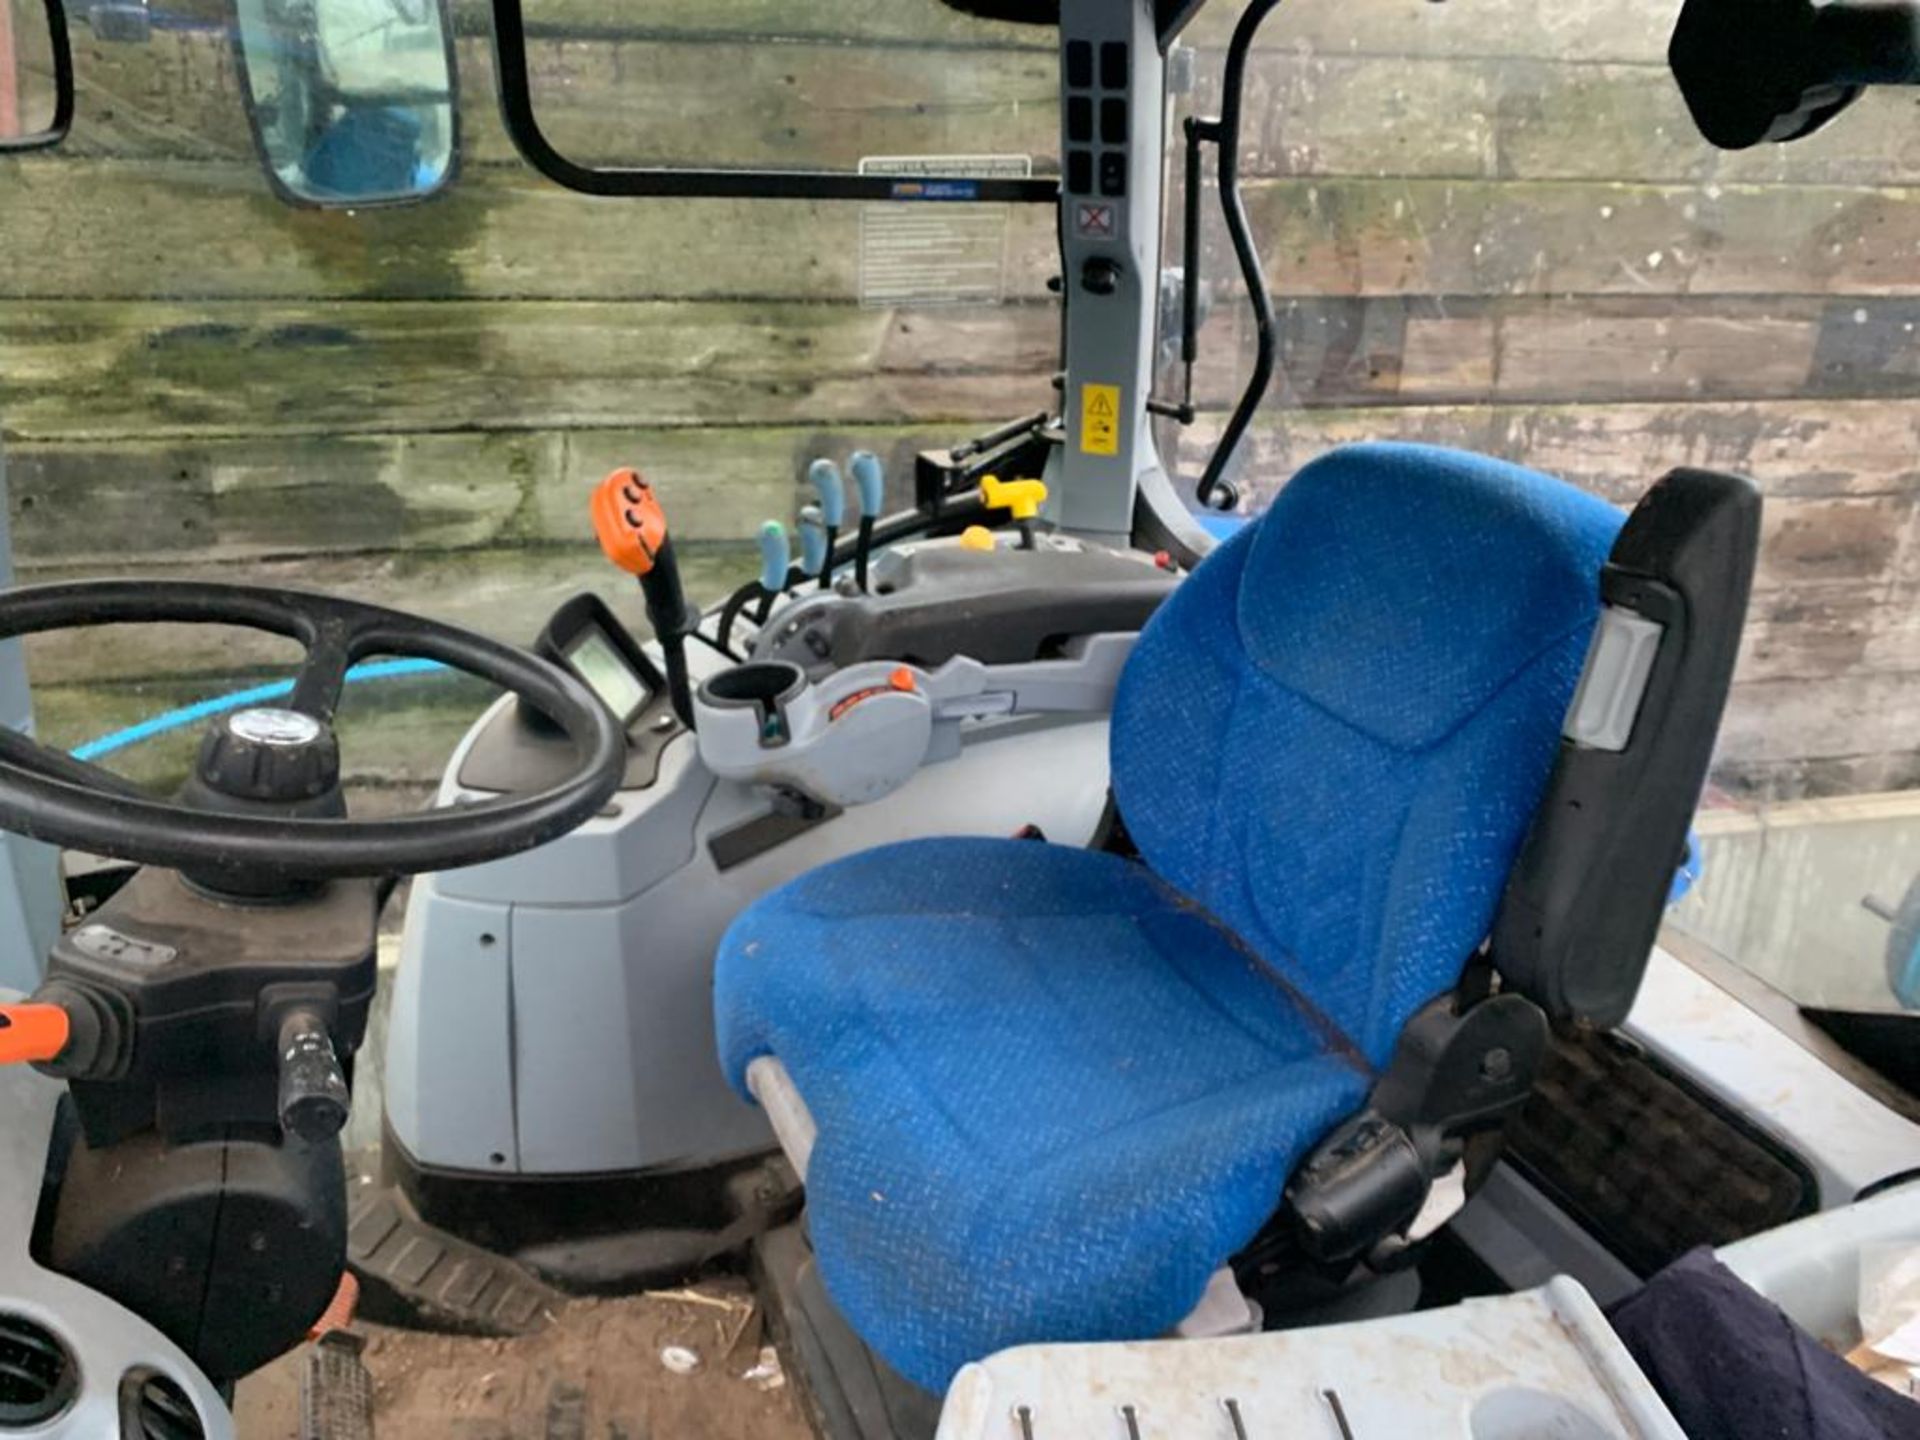 2013/63 REG NEW HOLLAND T7.200 TRACTOR, SHOWING 1 FORMER KEEPER, RUNS AND WORKS AS IT SHOULD. - Image 12 of 16